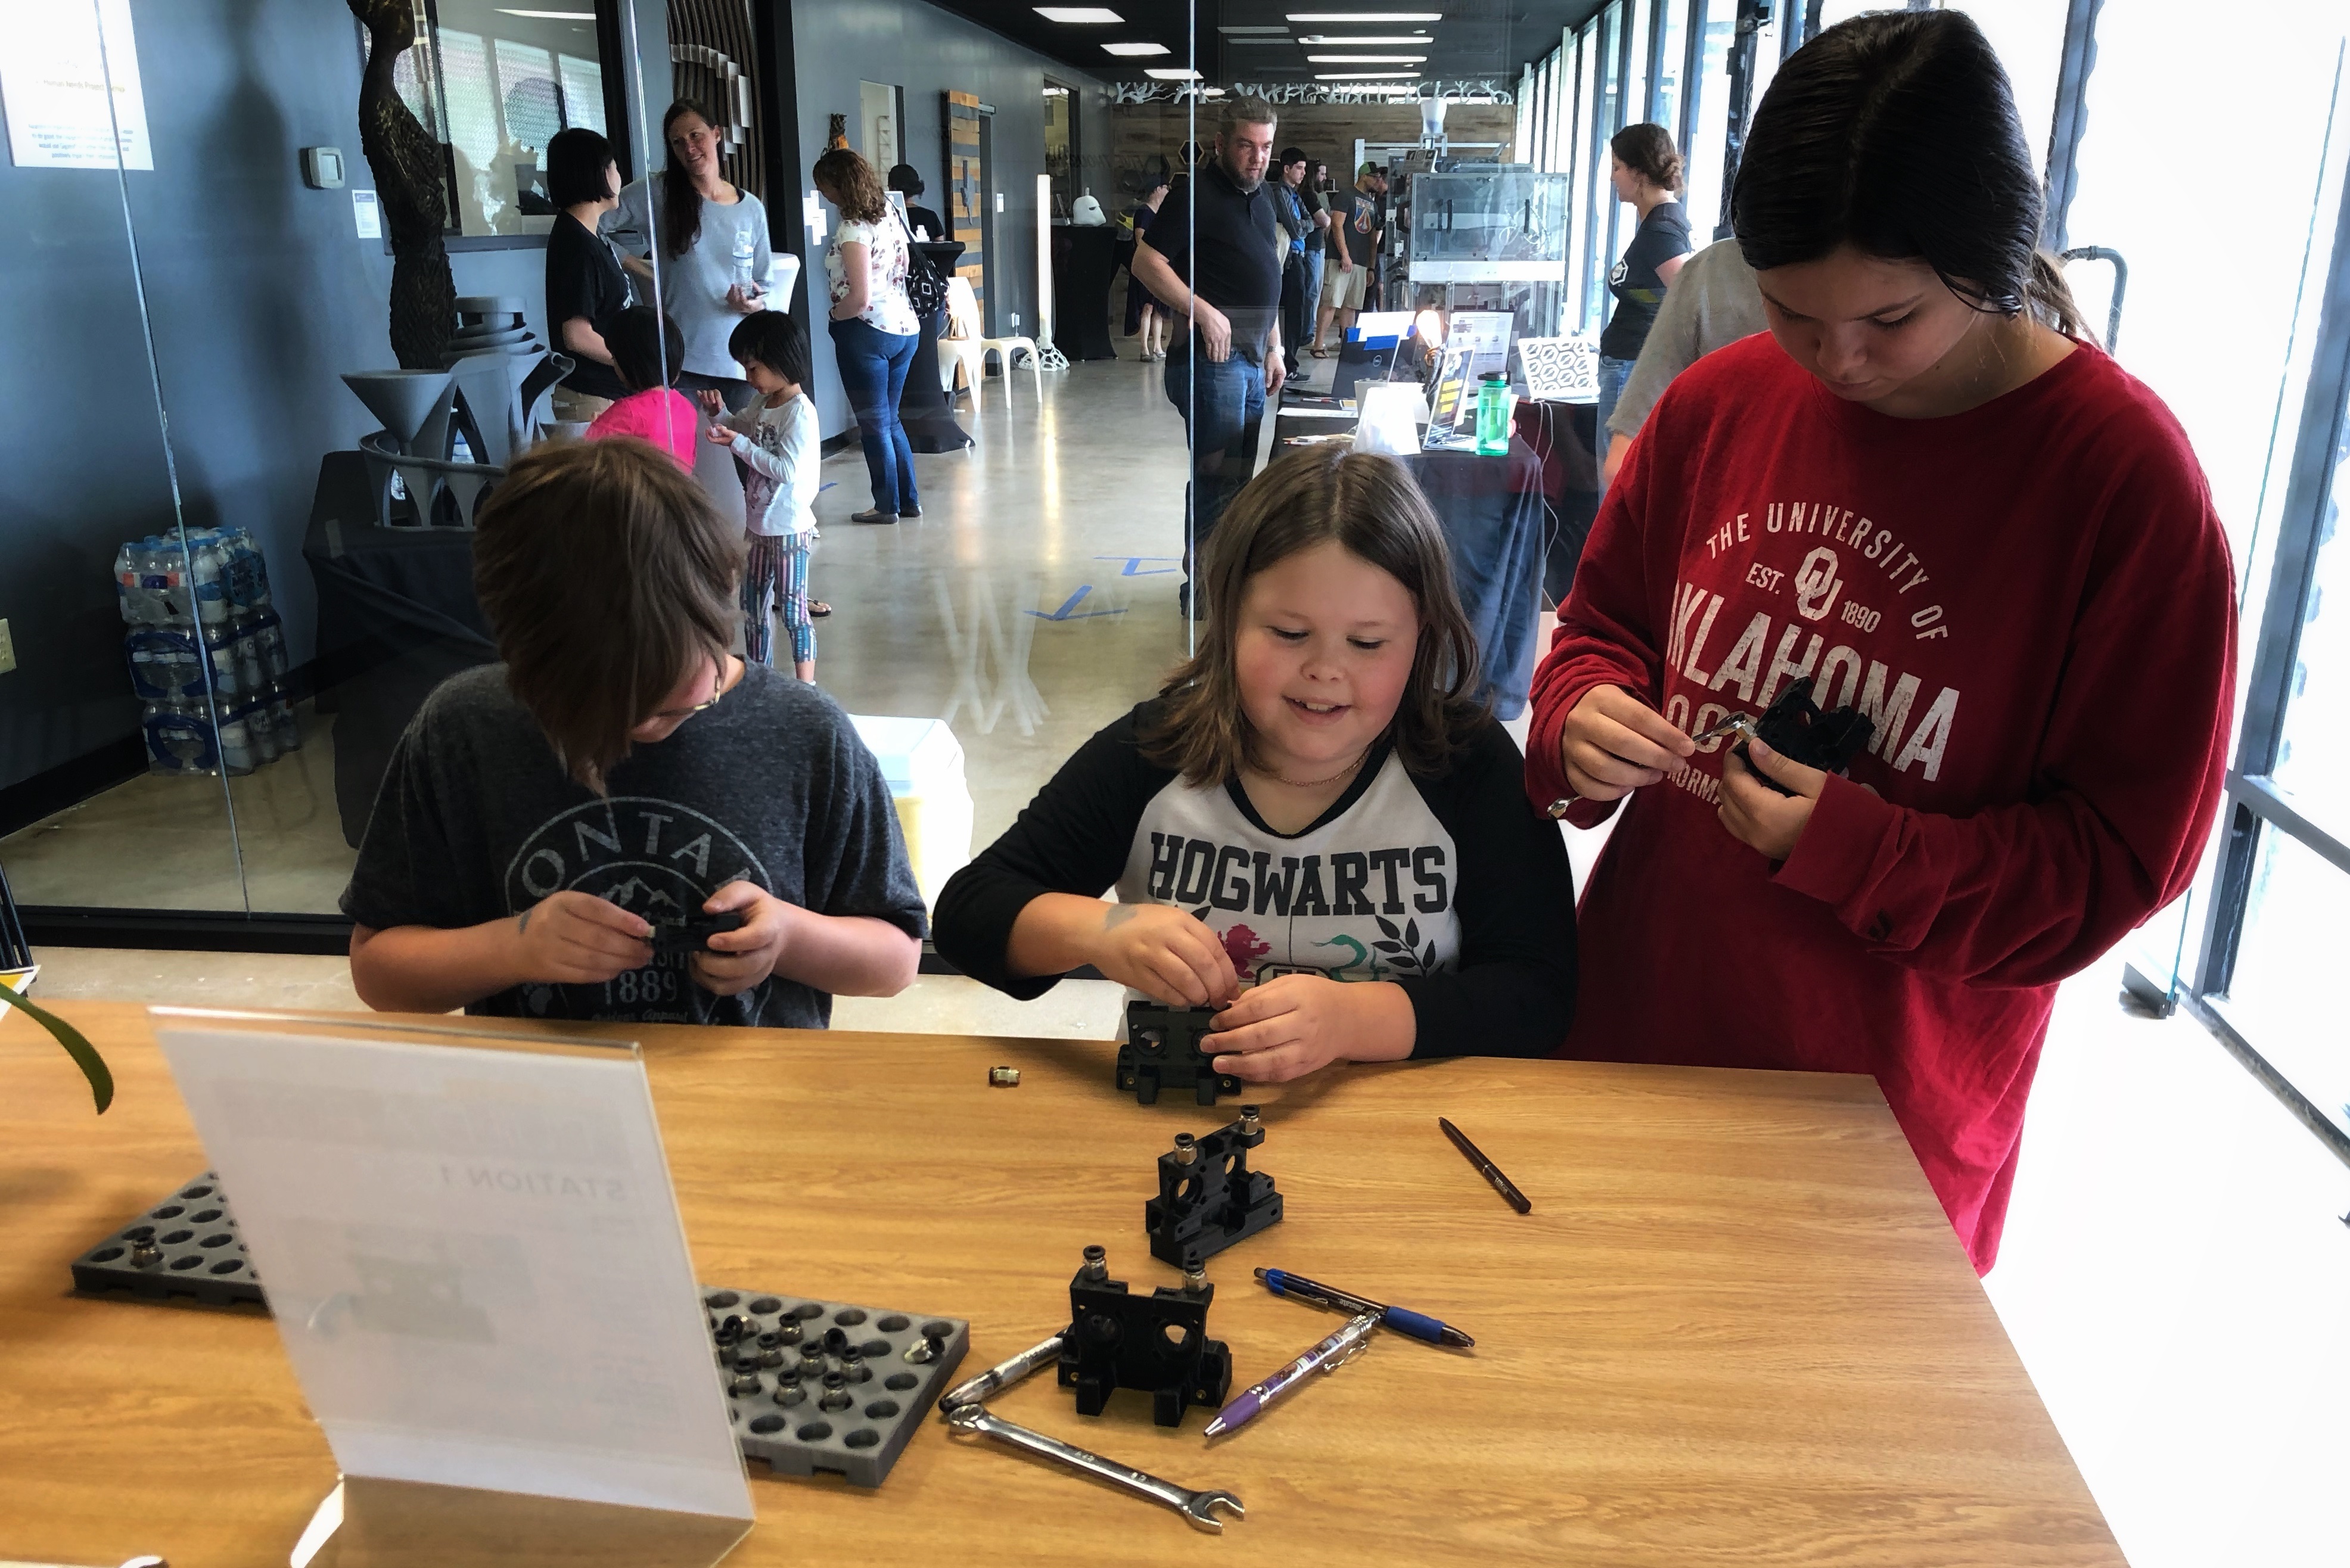 Three kids sit at a table with tools and build part of a 3D printer. A crowd of people is in the background.